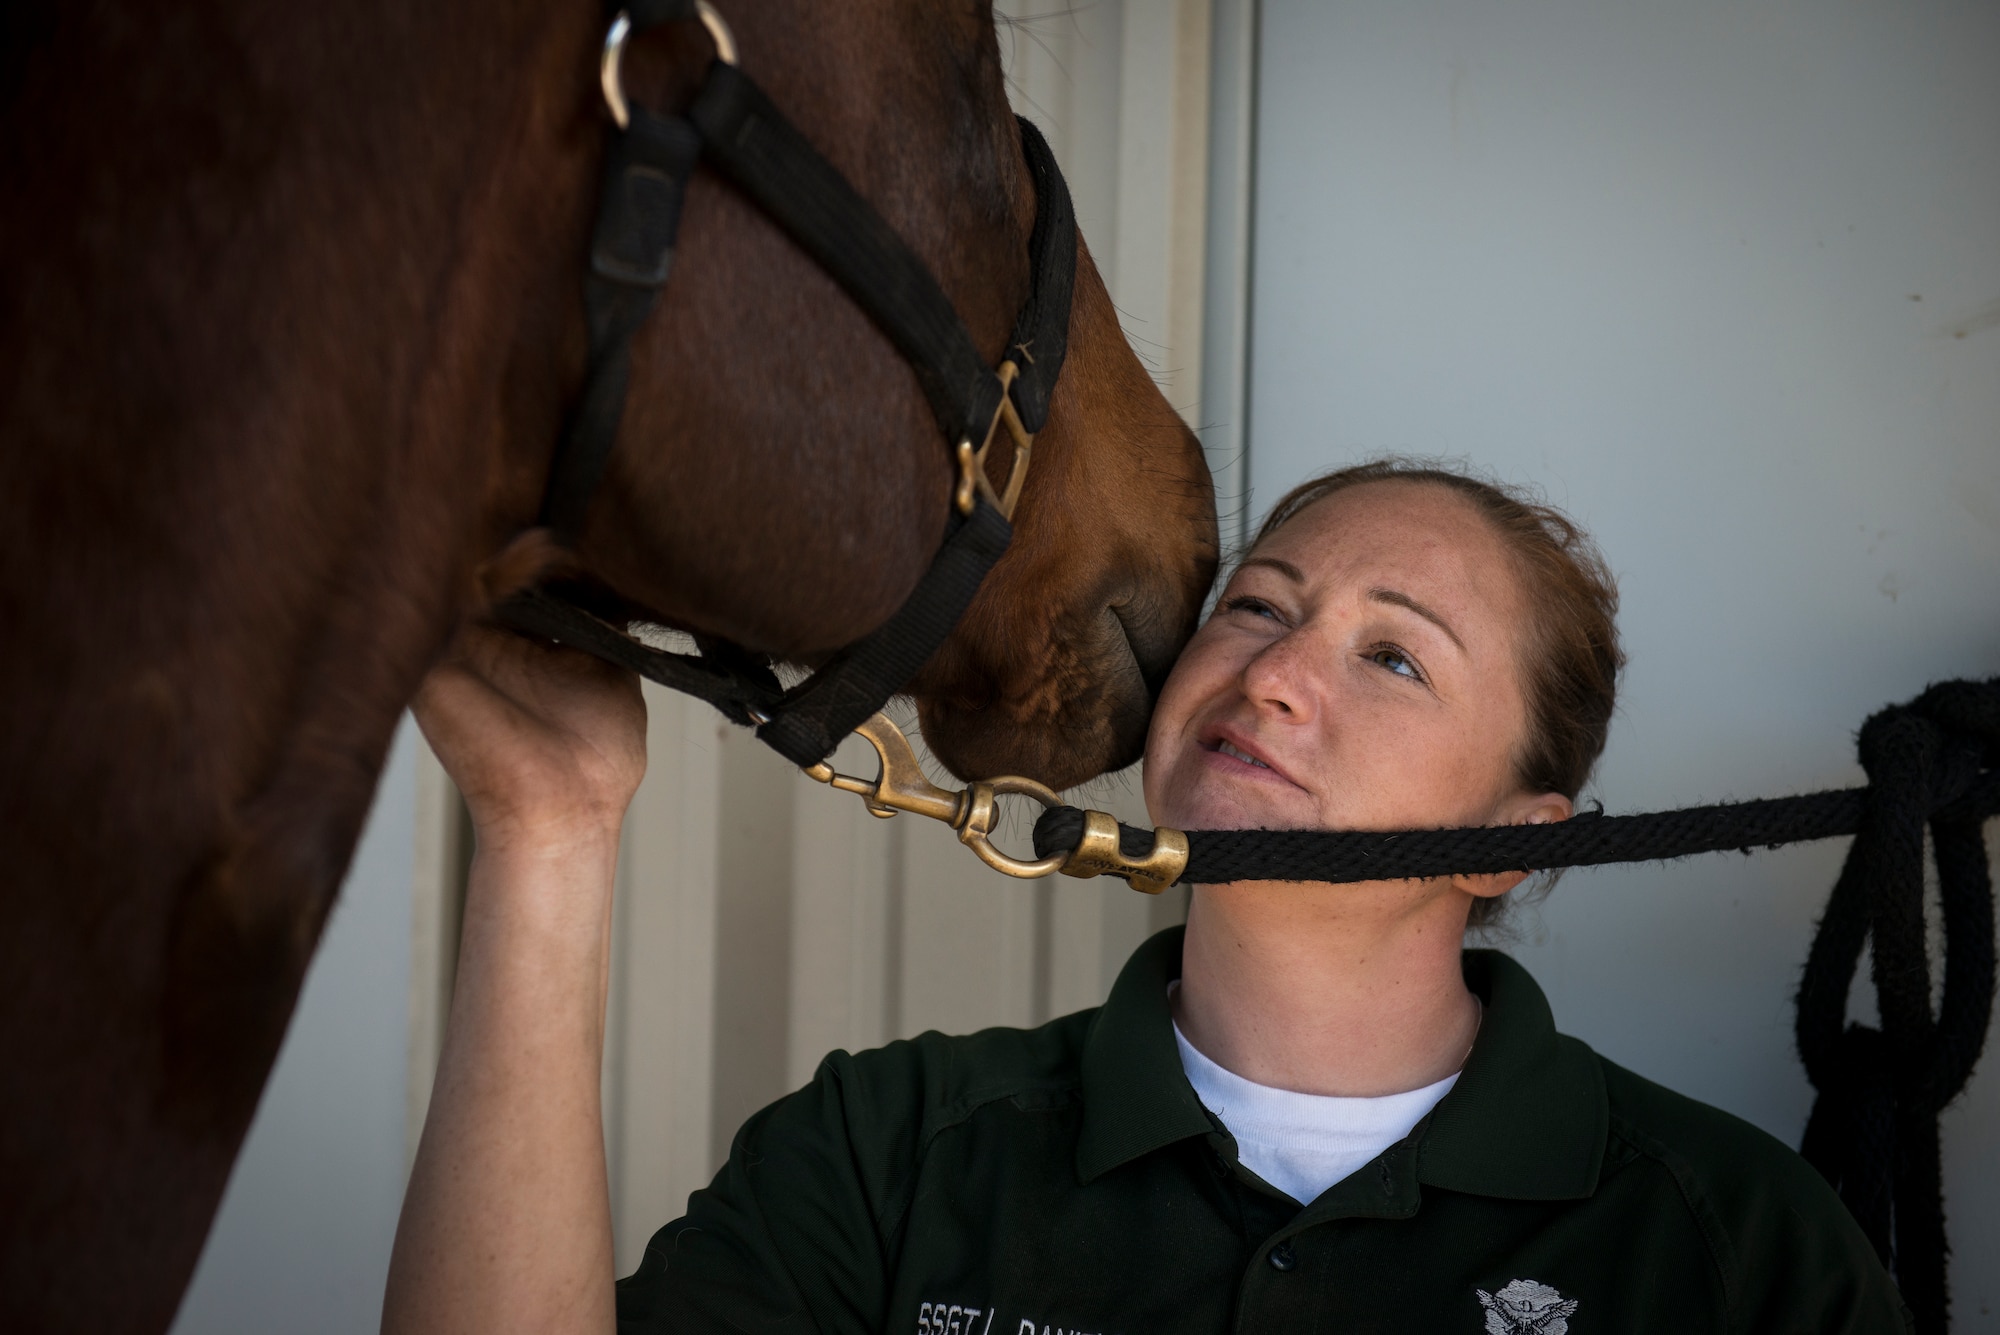 Reserve Staff Sgt. Lauren Daniels receives an unexpected kiss from Trooper, one of four military horses in the Vandenberg Air Force Base, California mounted patrol. (U.S. Air Force photo/Staff Sgt. Andrew Lee)